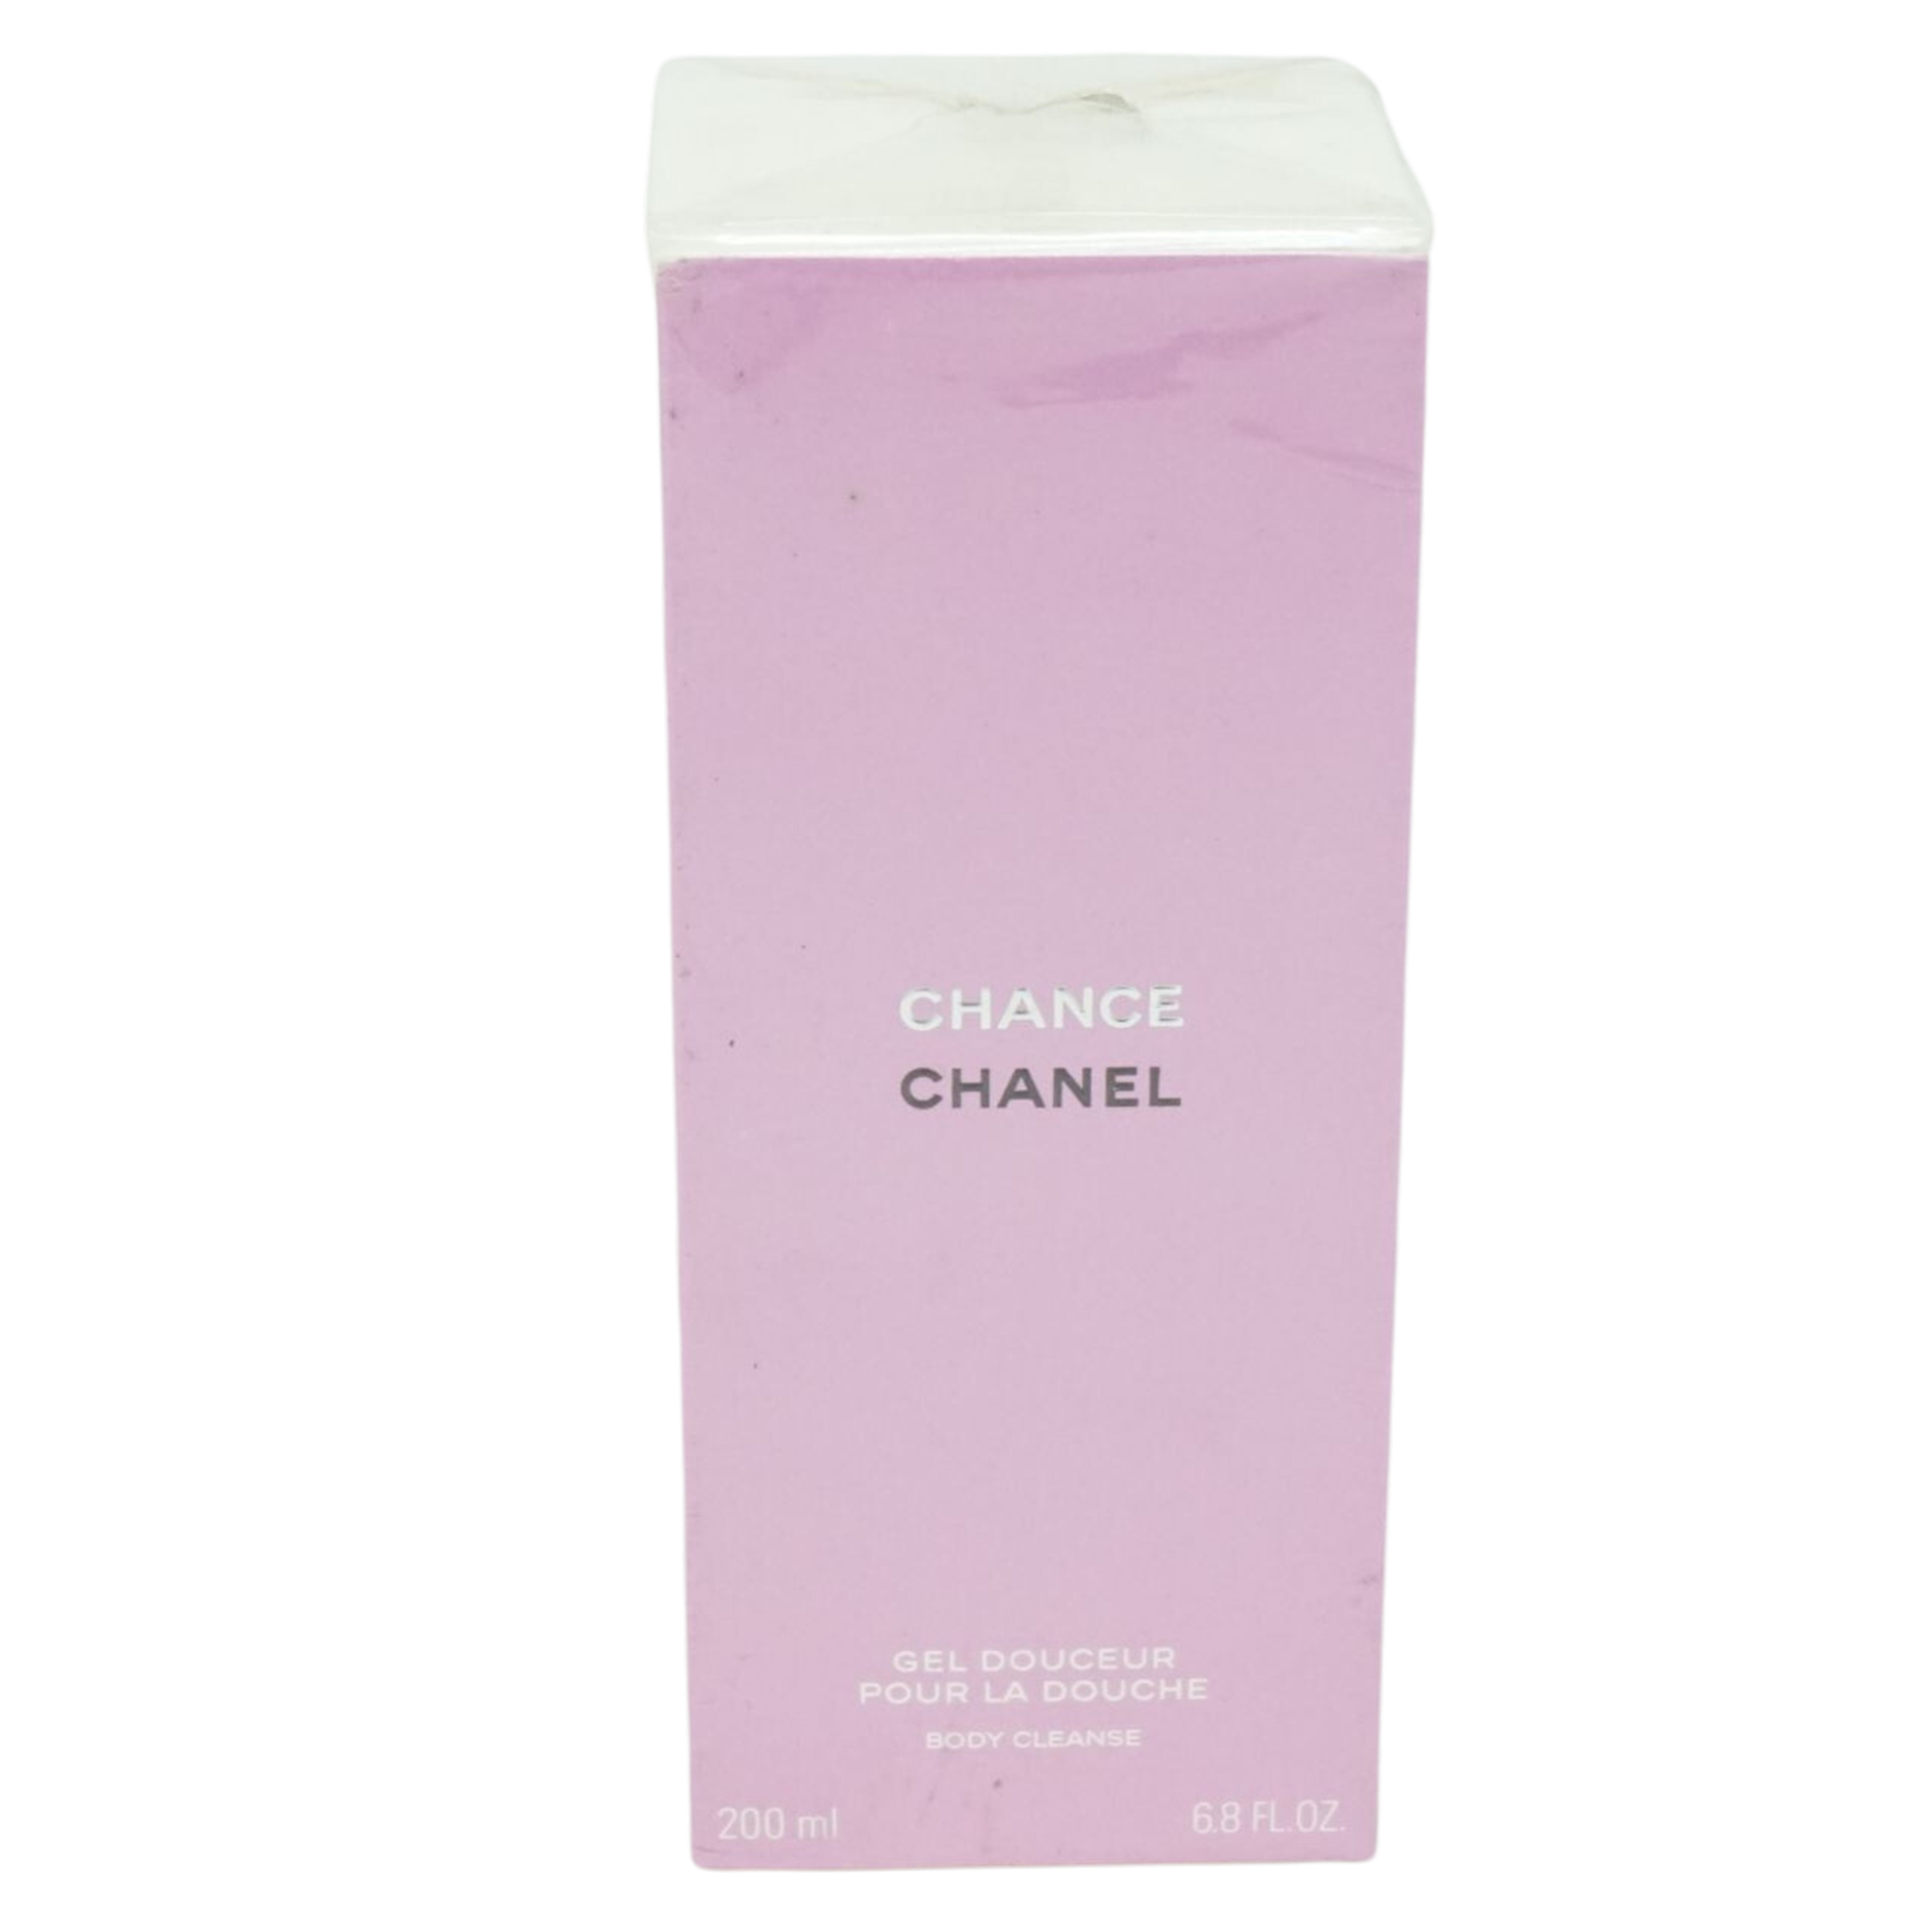 Chanel Chance Body Cleanse Bath and Shower Gel 200ml